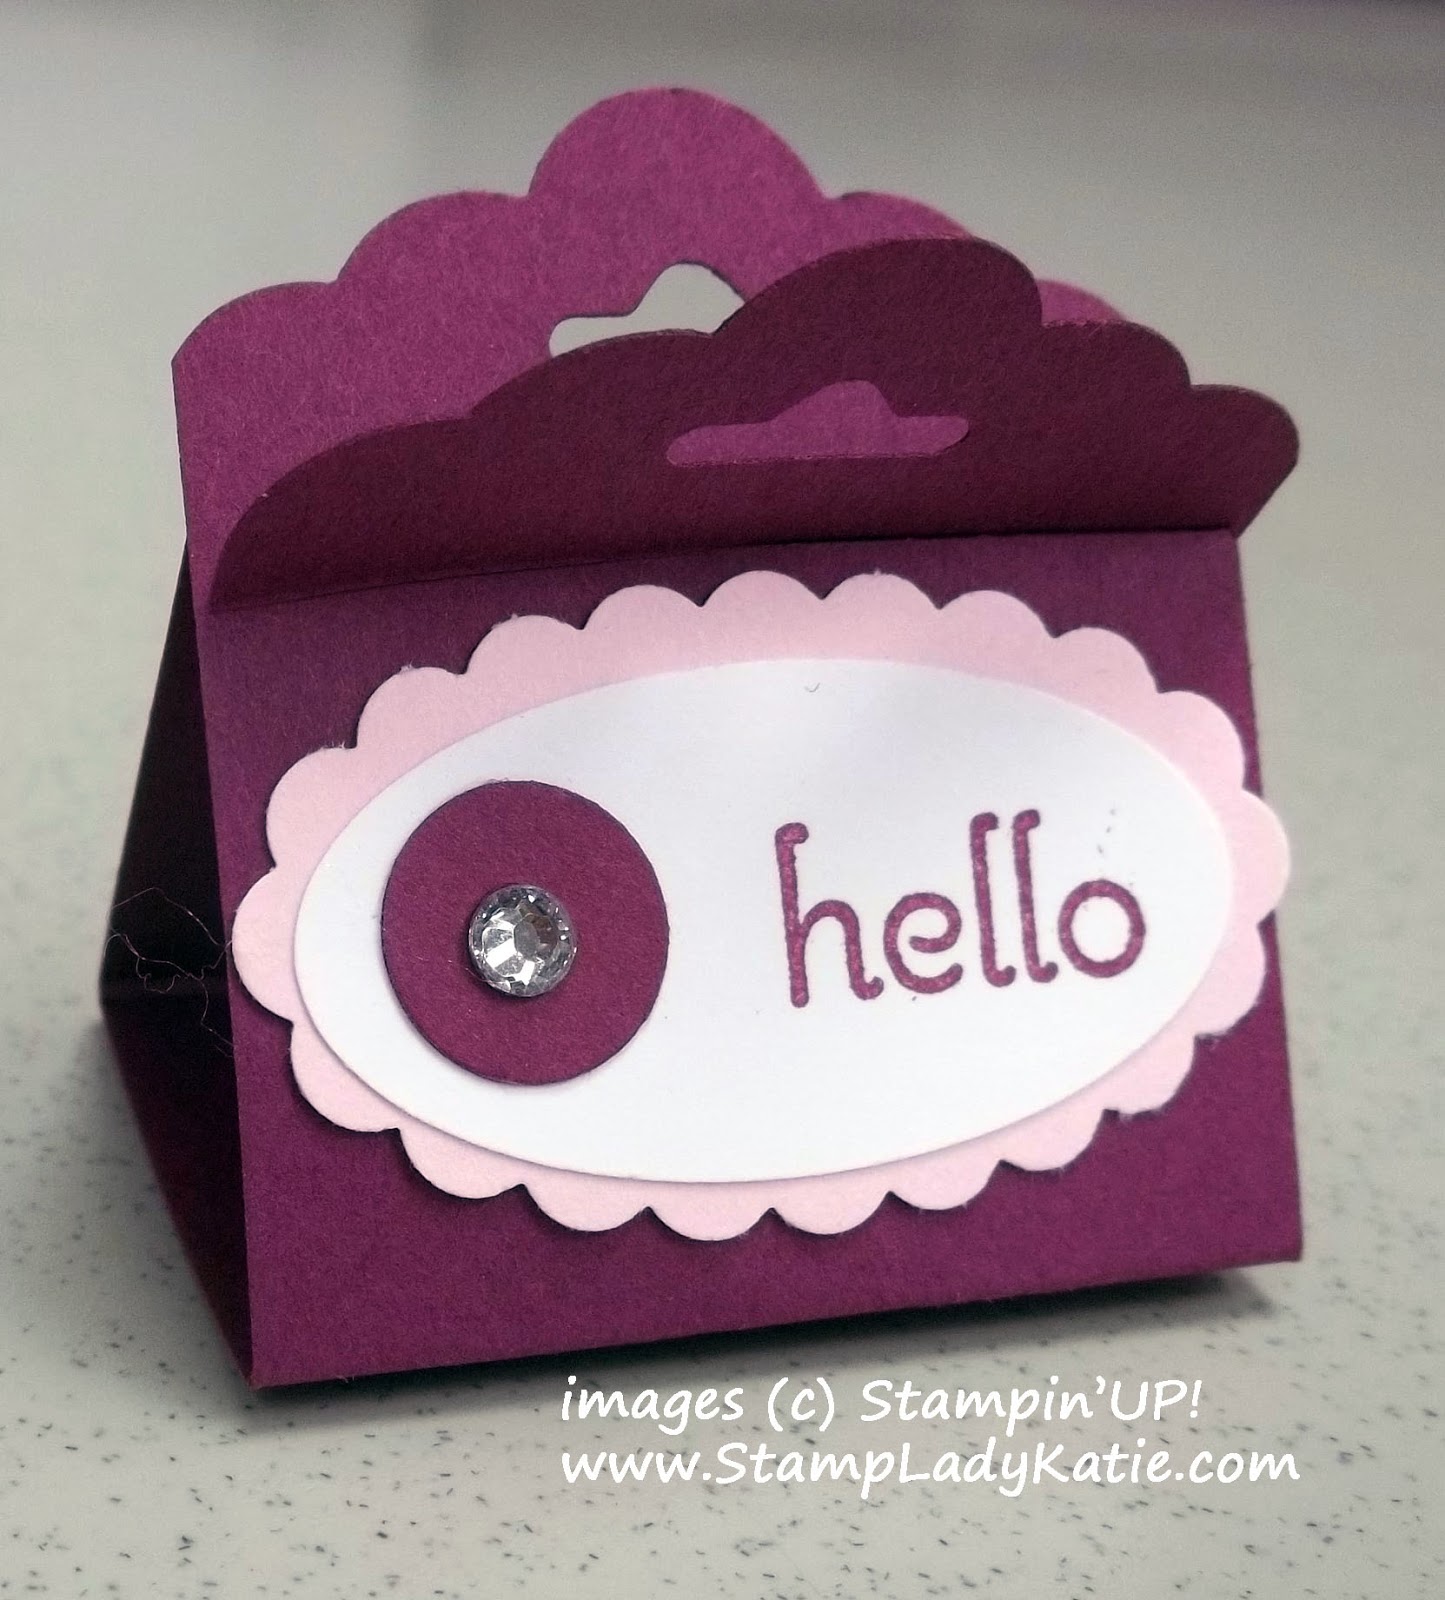 Candy Treat Holder made with Stampin'UP! punches including the new Scallop Tag Topper Punch.